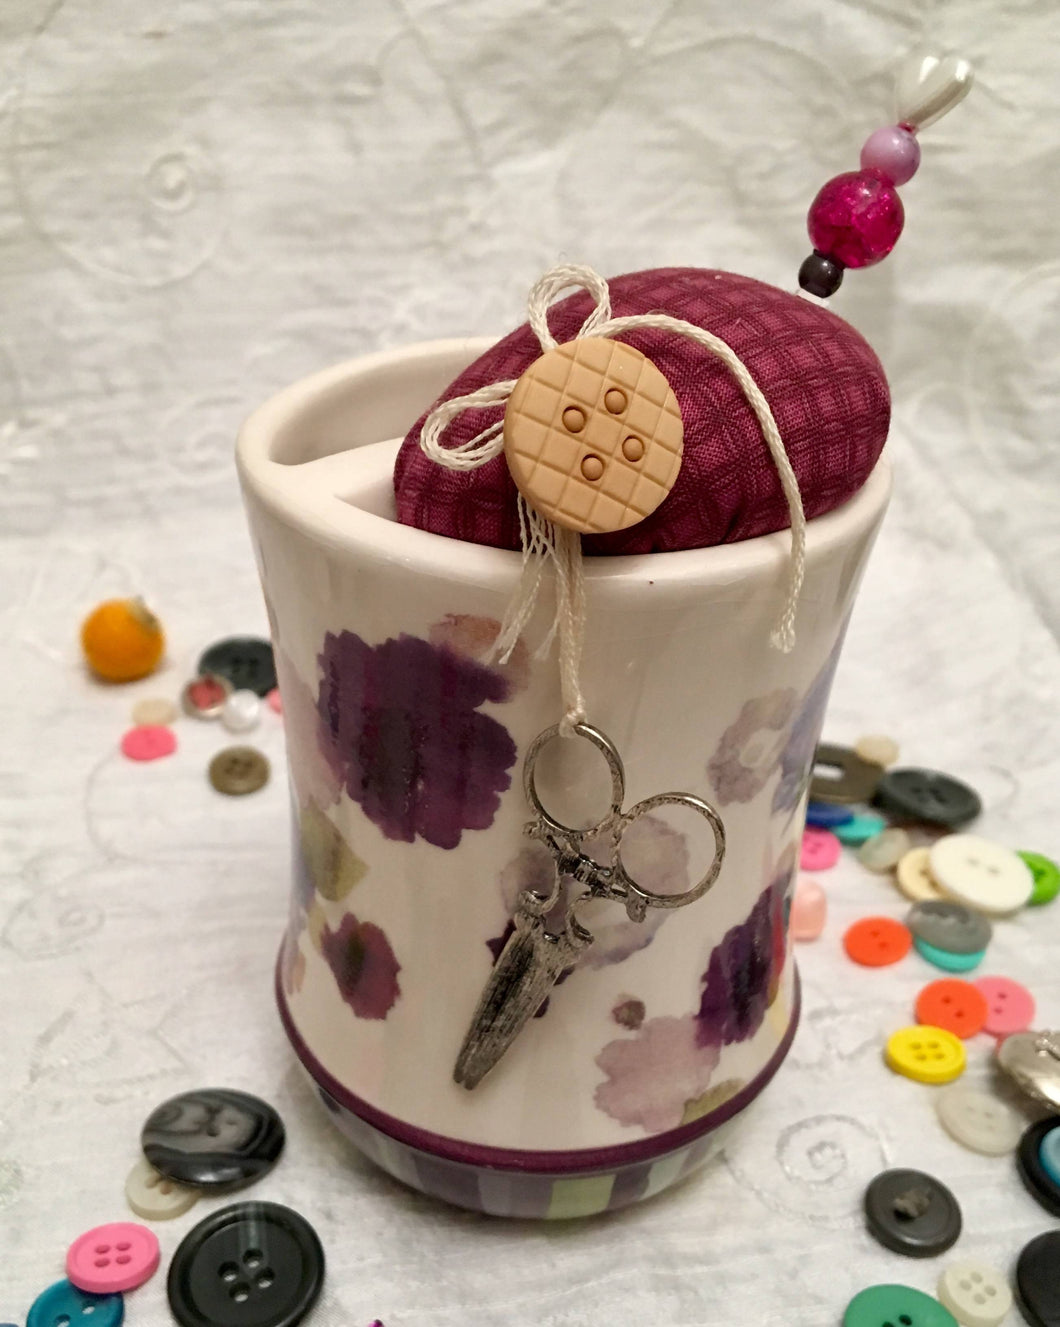 Pincushion, purple/blue pansies on upcycled holder for pins and tools